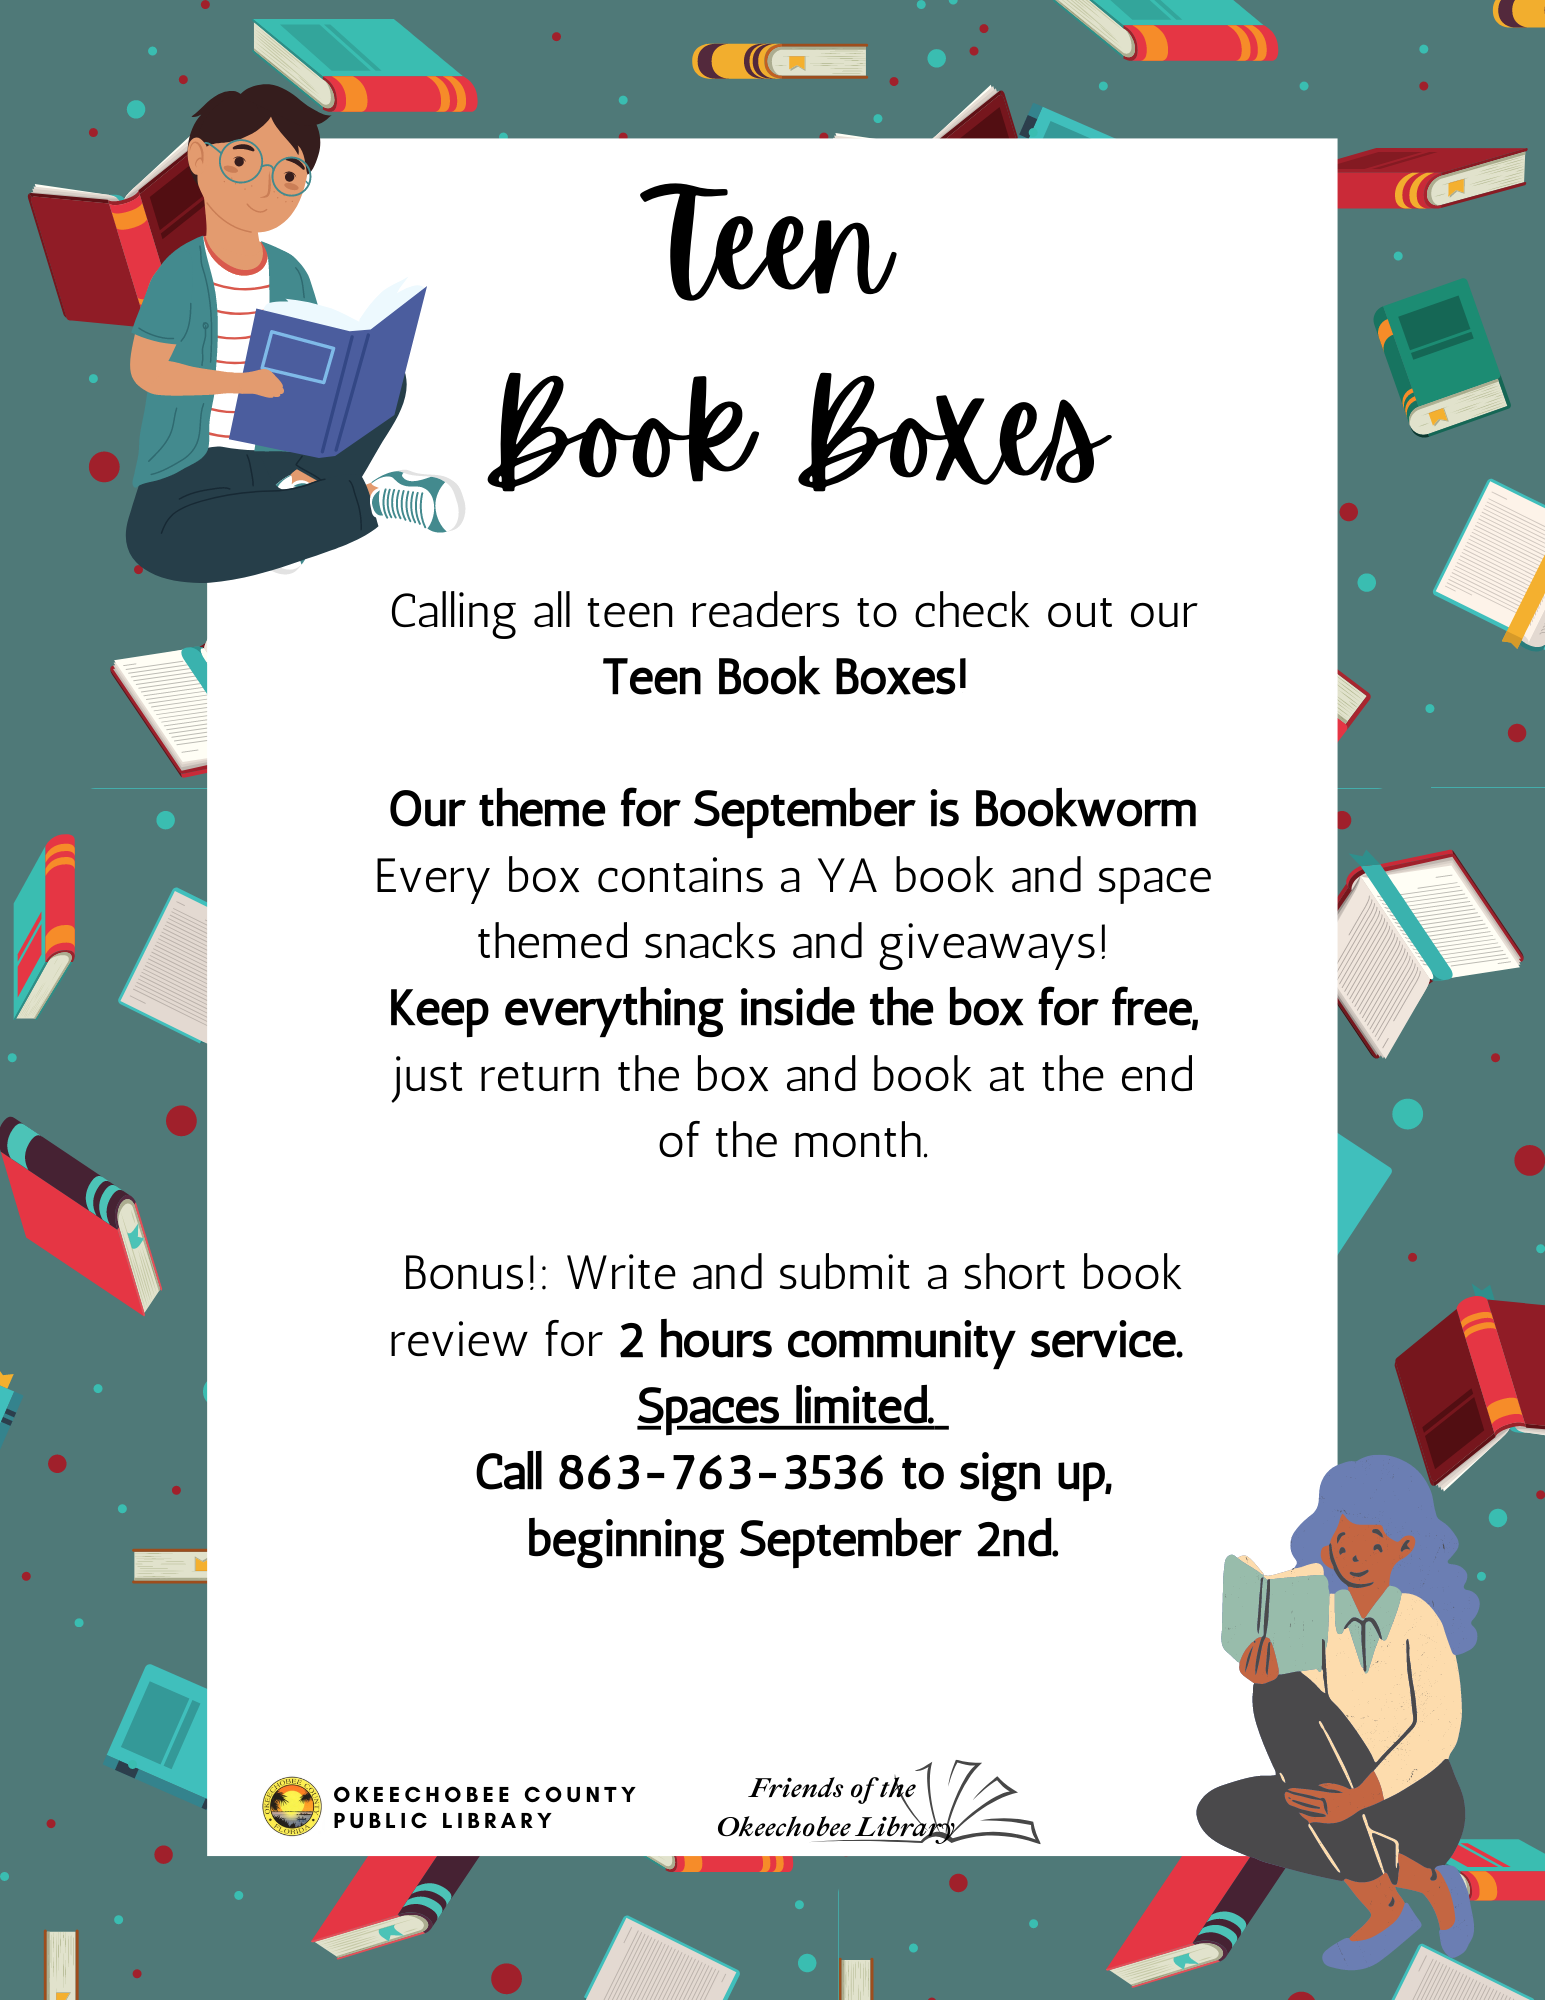 September Teen Book Boxes! Open to all teens, get free prizes and snacks just for checking out a book! Bonus: Write a short summary/review of the book and turn it in to get up to 2 hours of community service!